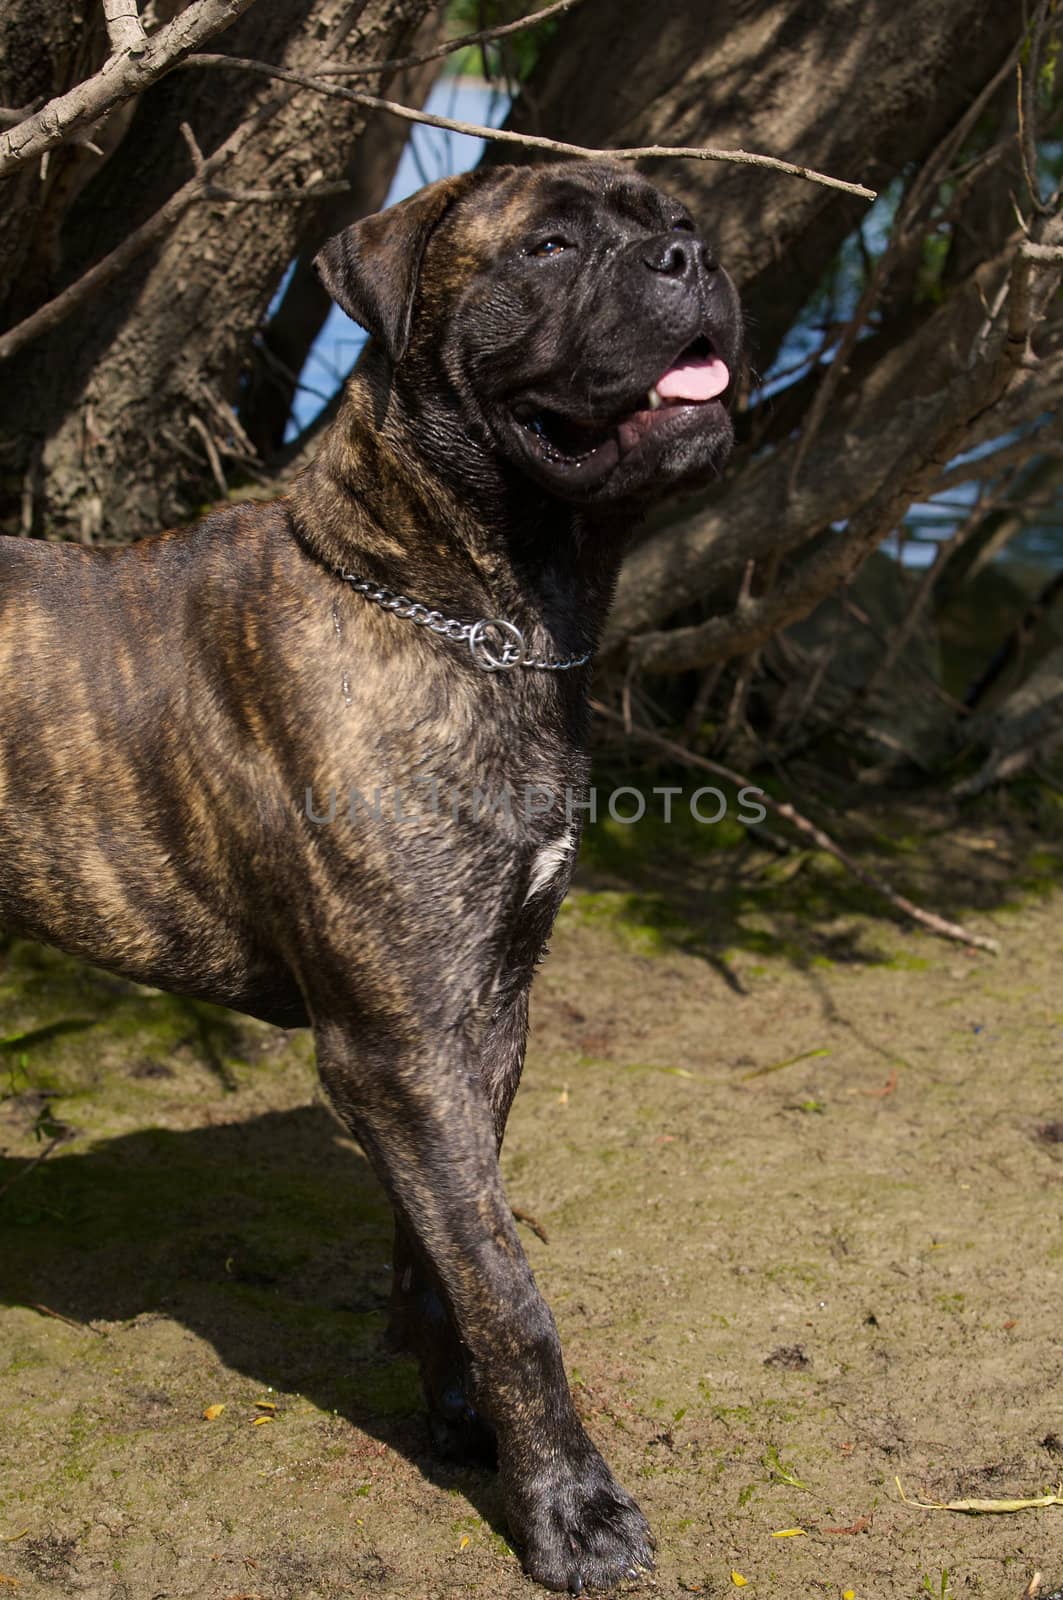 A bullmastiff standing in the sand.